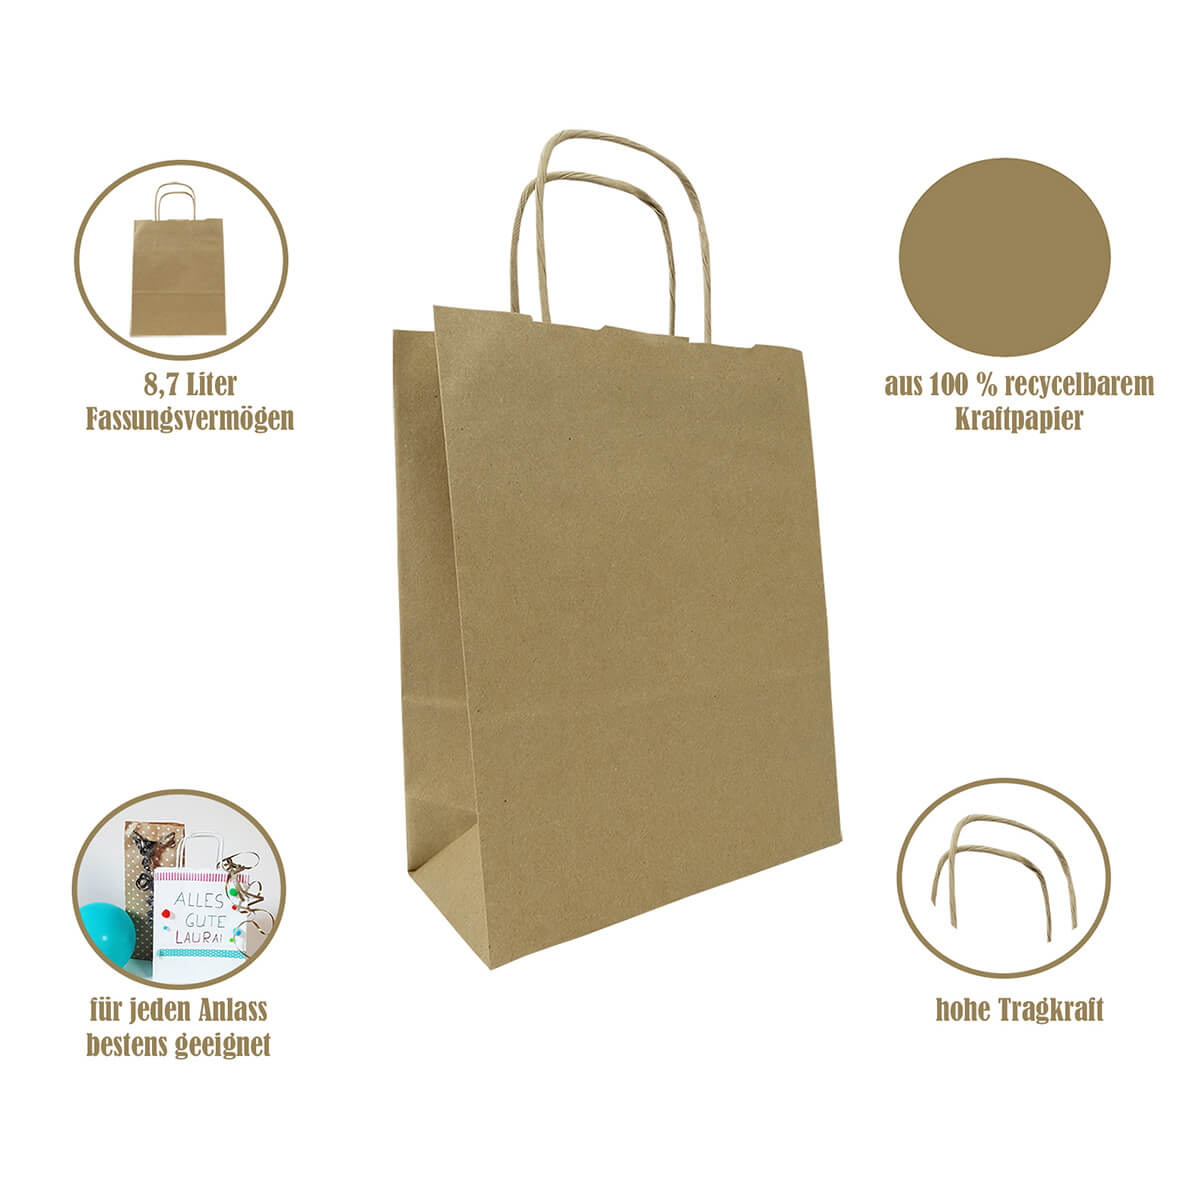 Paper bags with cord 33 x 24 x 11 cm - paper carrier bags white